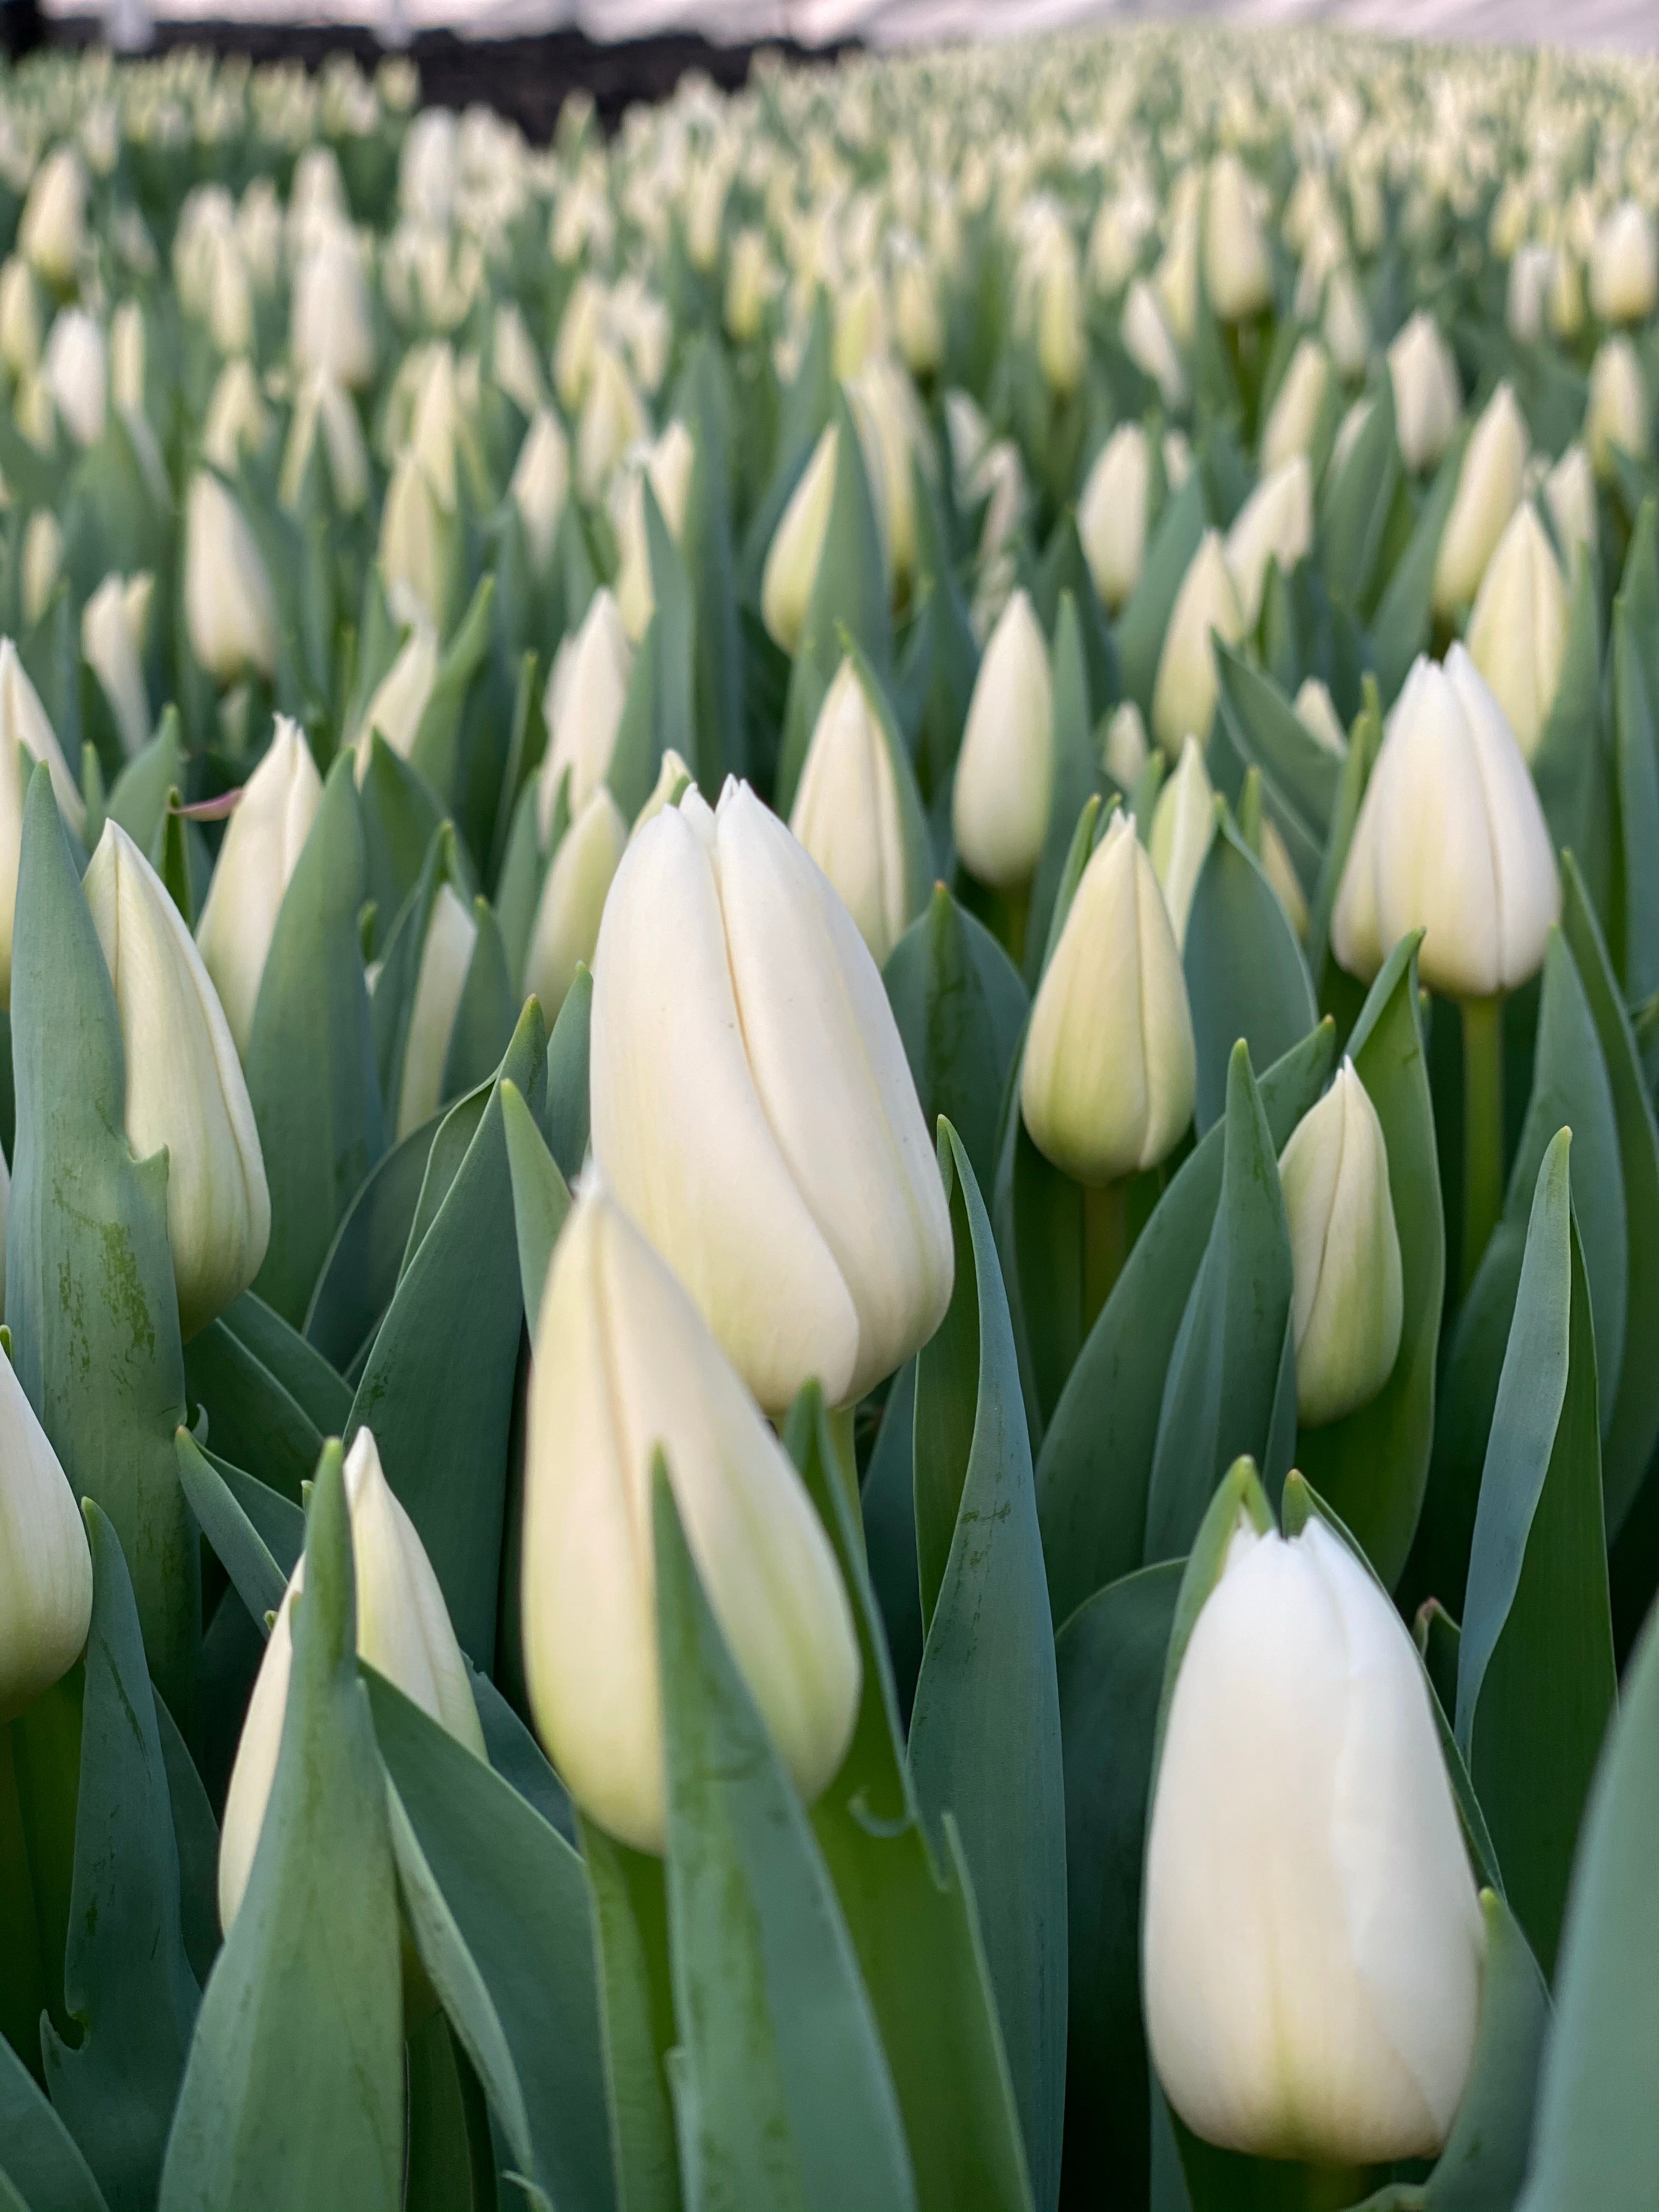 Update - White Tulips - Mother's Day Preorder